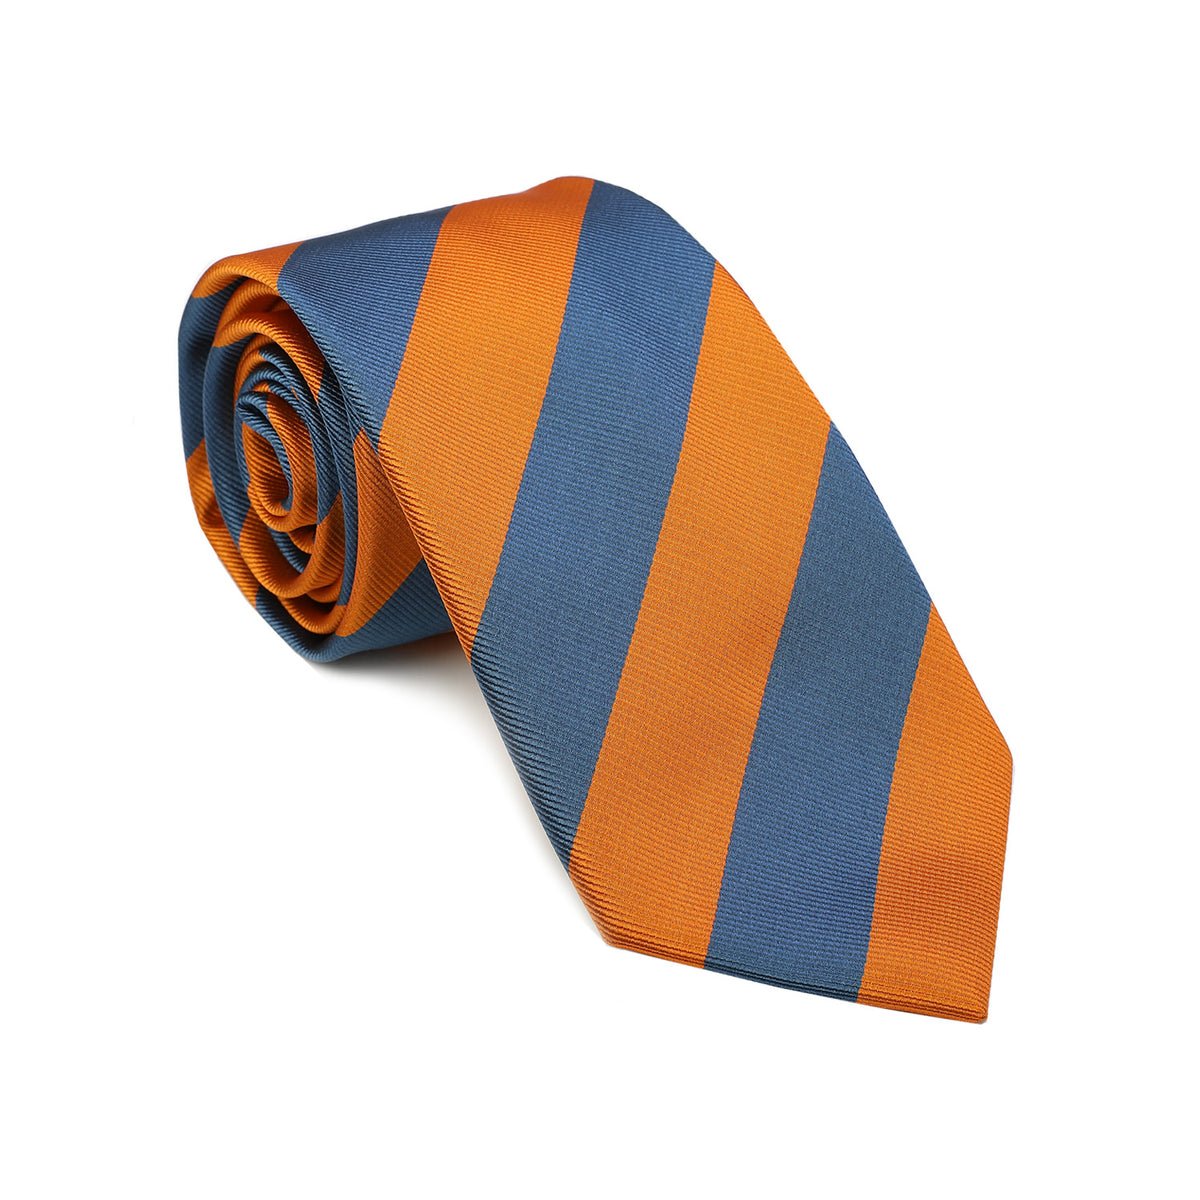 The Haspel tie is the straw that stirs the drink. Geaux the distance, finish the look and stay ahead of your pack.